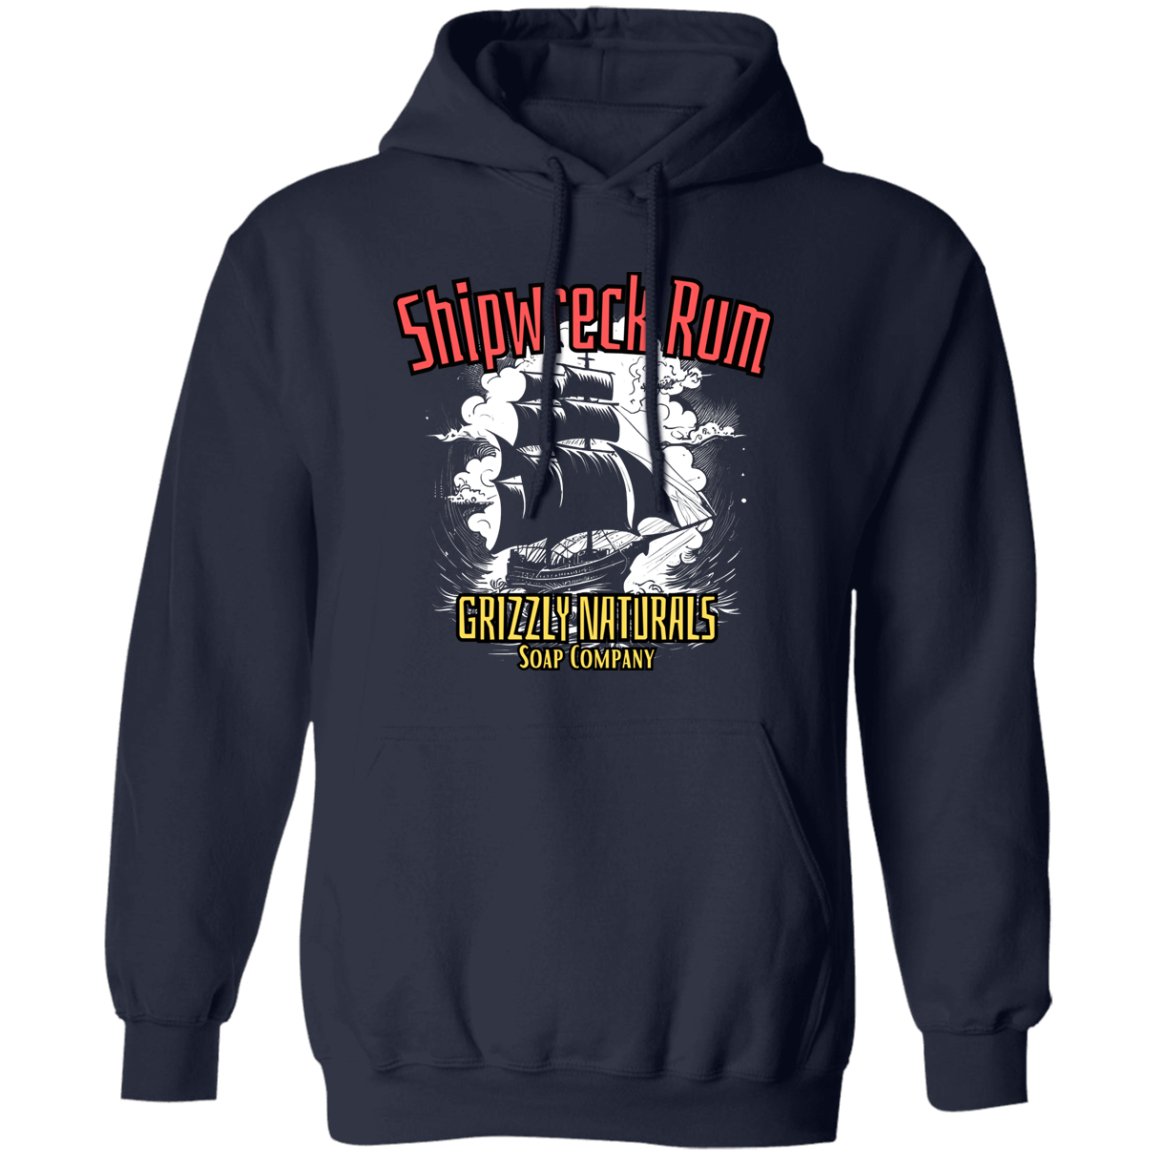 Grizzly Naturals Apparel - Shipwreck Rum - Grizzly Naturals Soap Company